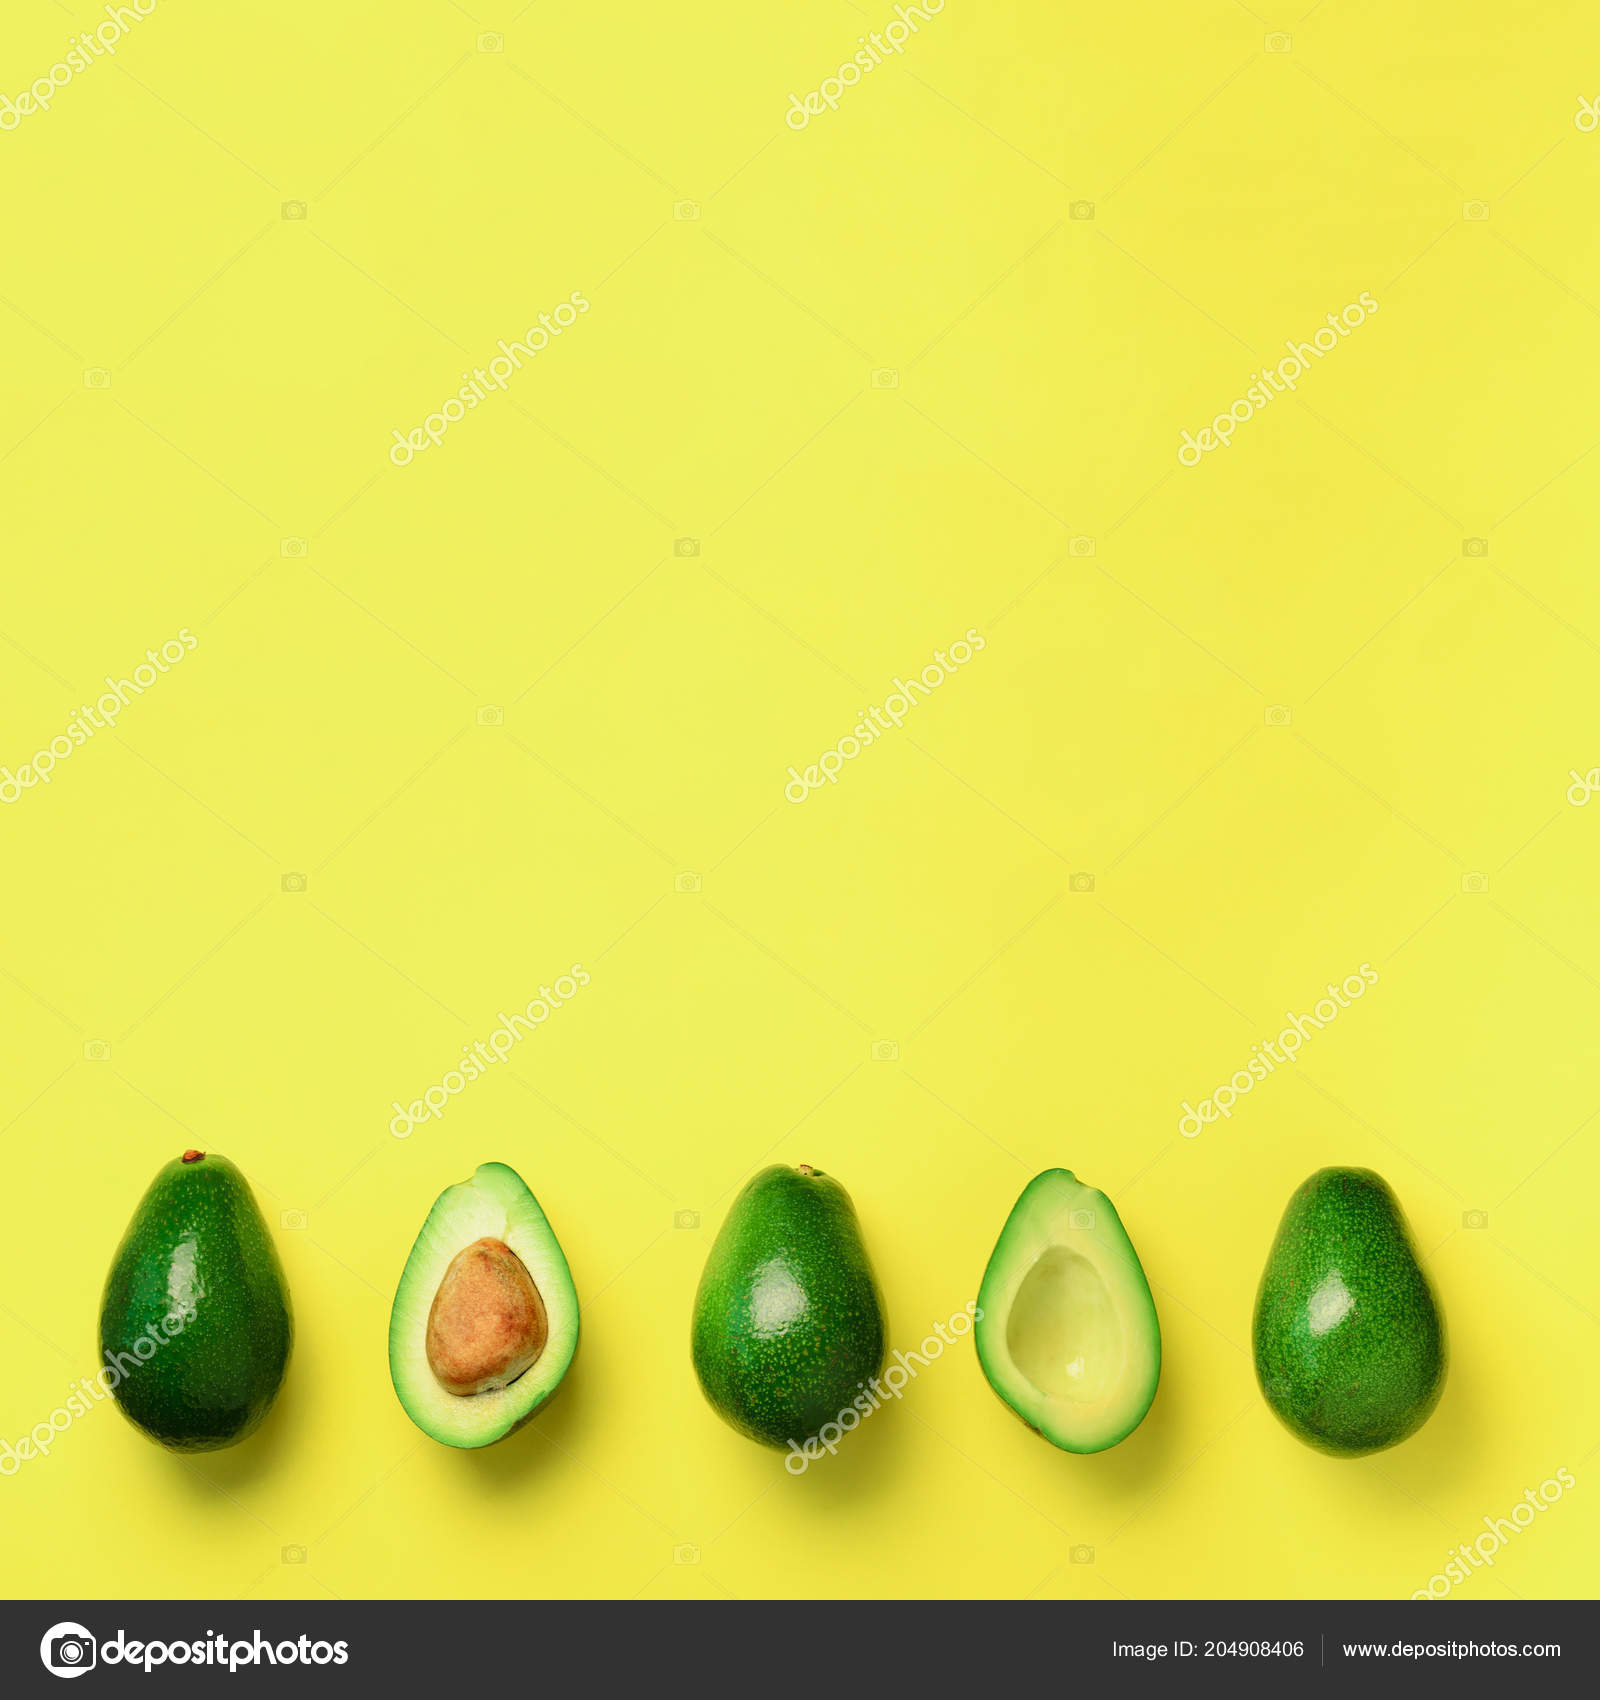 Organic avocado with seed, avocado halves and whole fruits on yellow  background. Top view. Square crop. Pop art design, creative summer food  concept. Green avocadoes pattern in minimal flat lay style. Stock